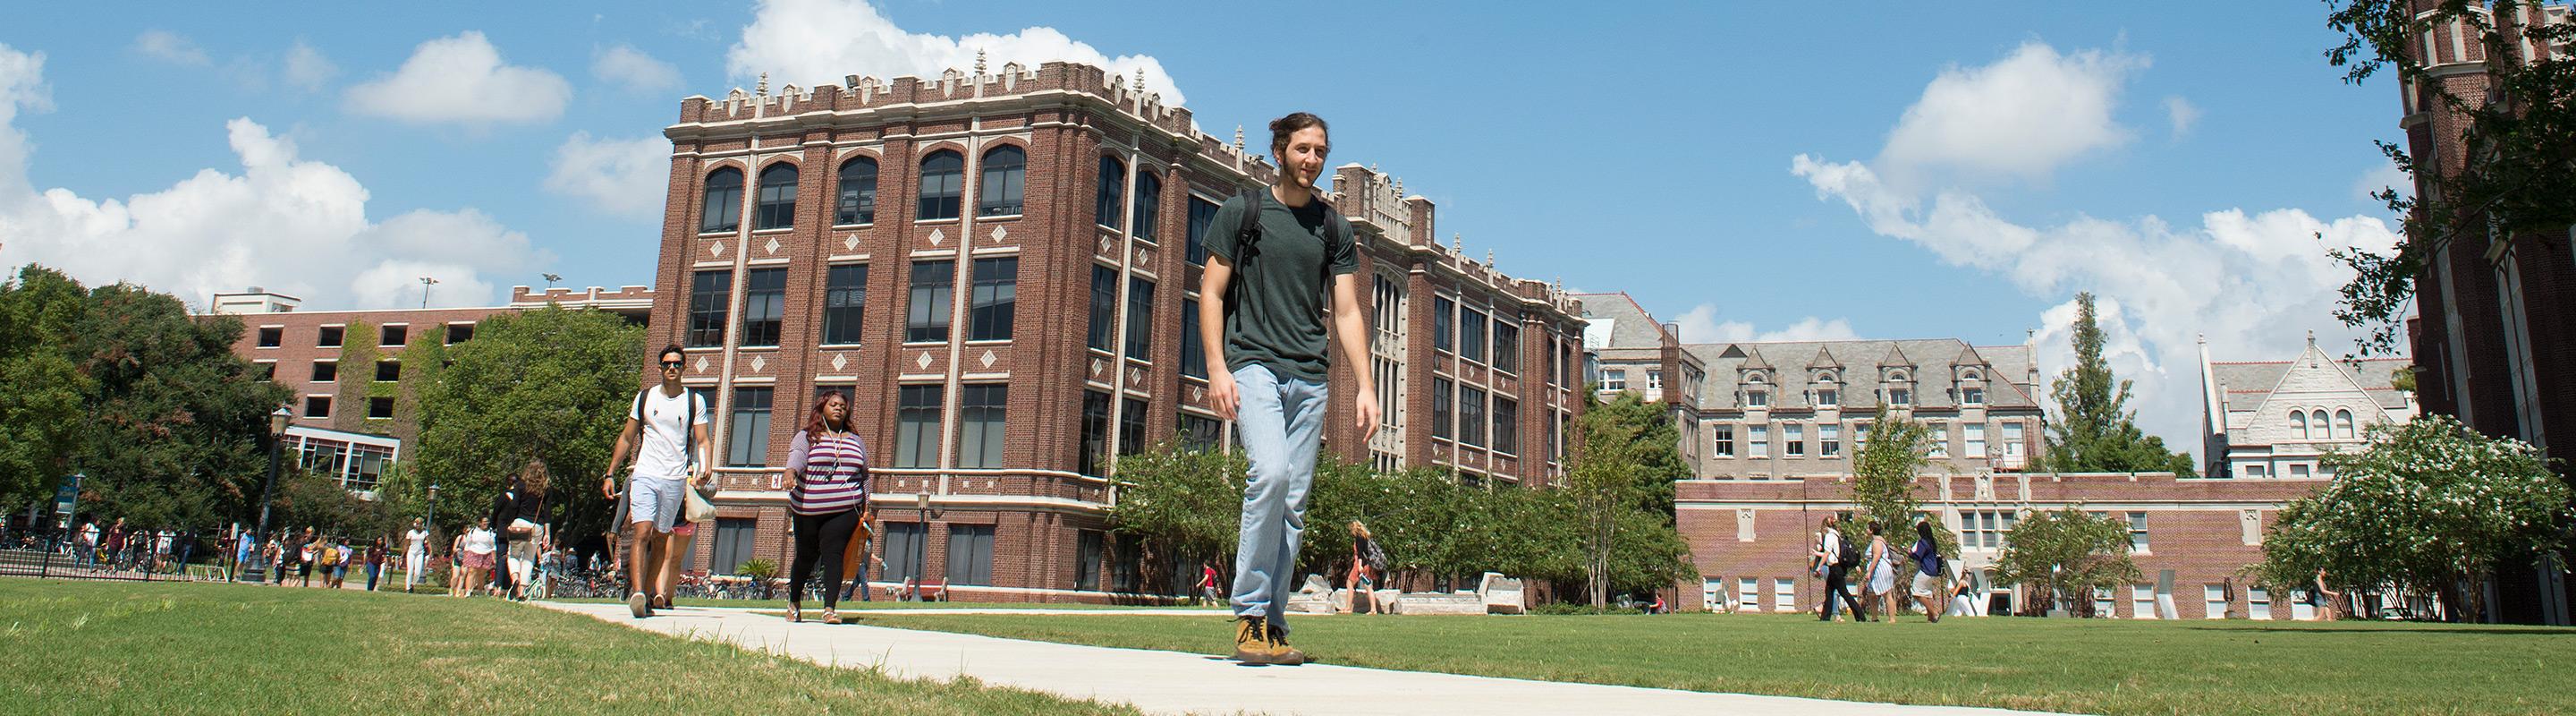 Student walking through academic quad in the middle of the day